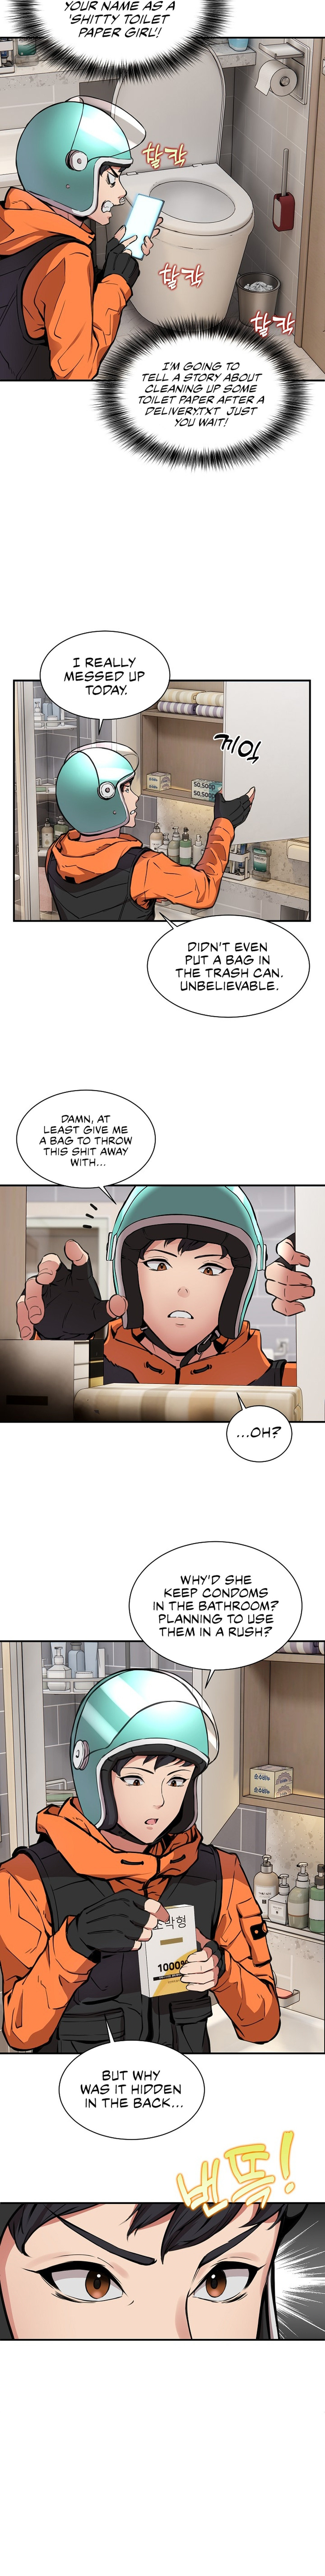 Driver in the New City - Chapter 1 Page 28